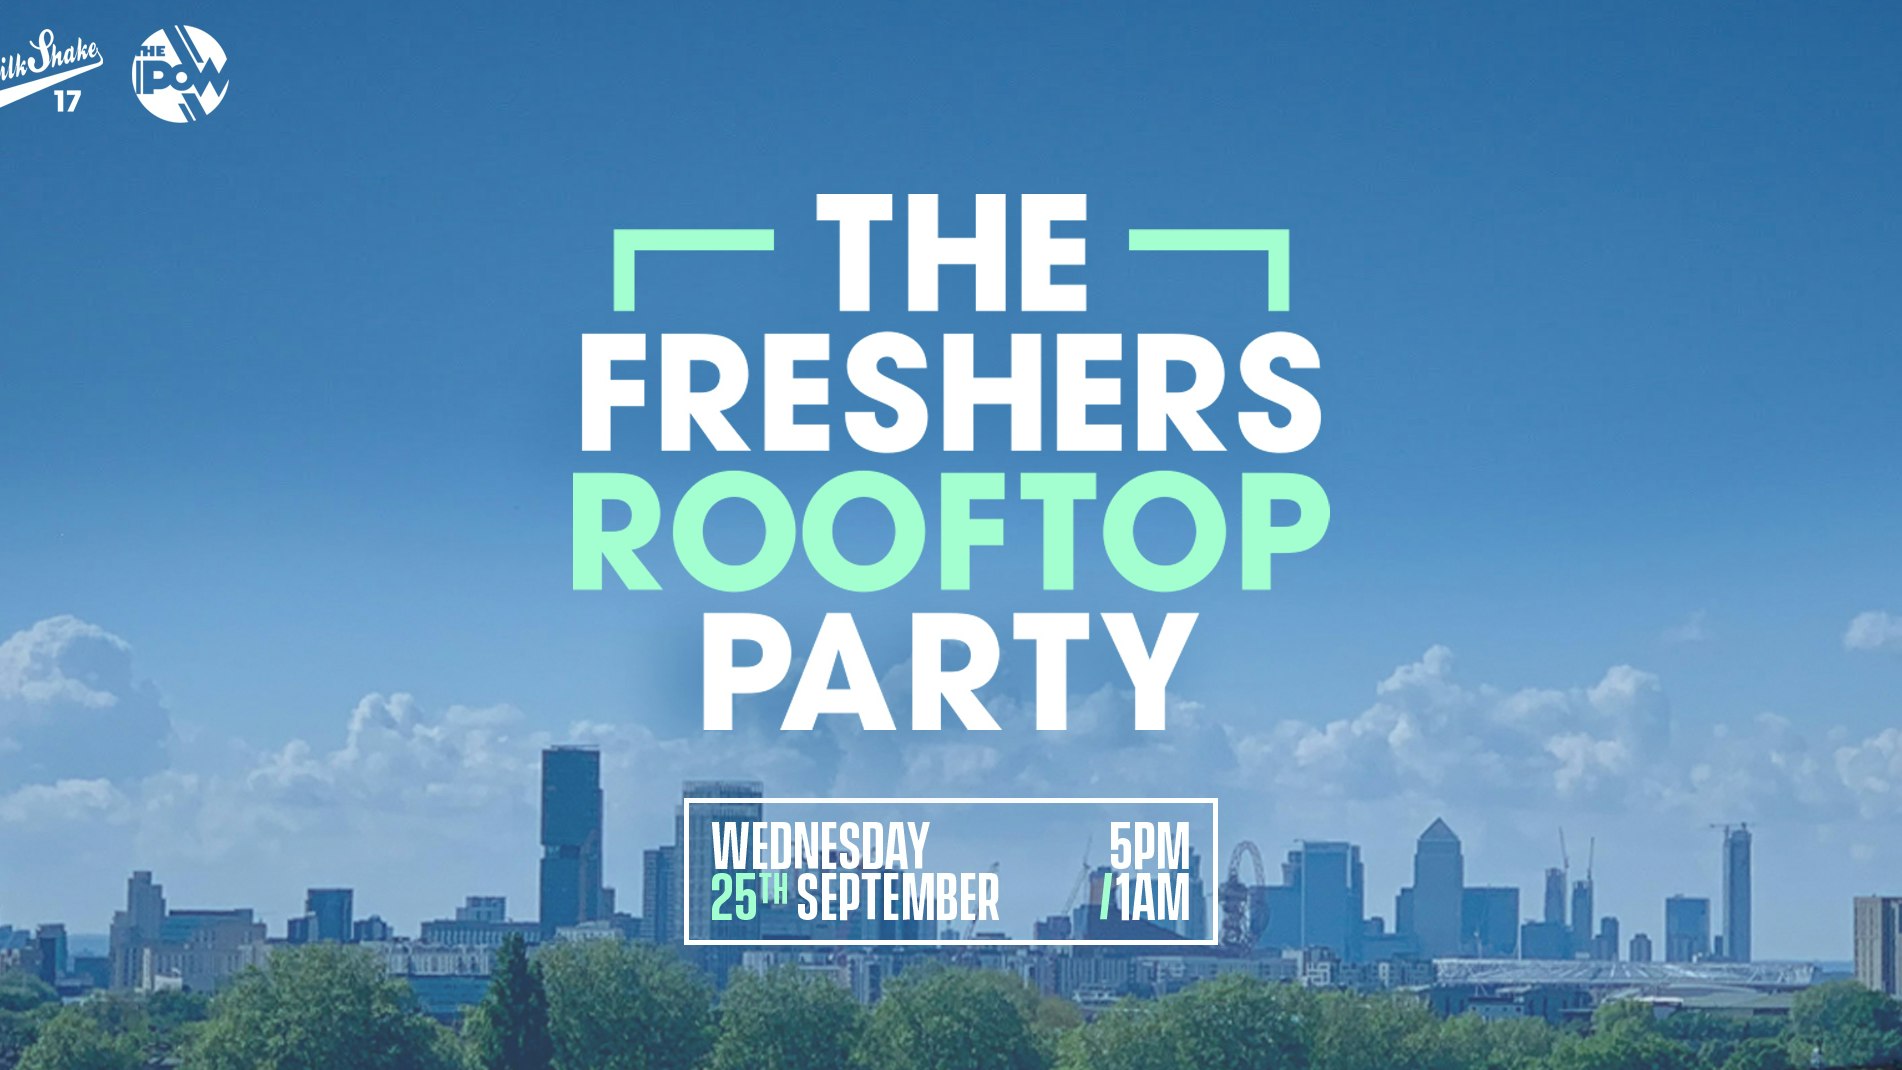 The London Freshers Roof Top Party 2019